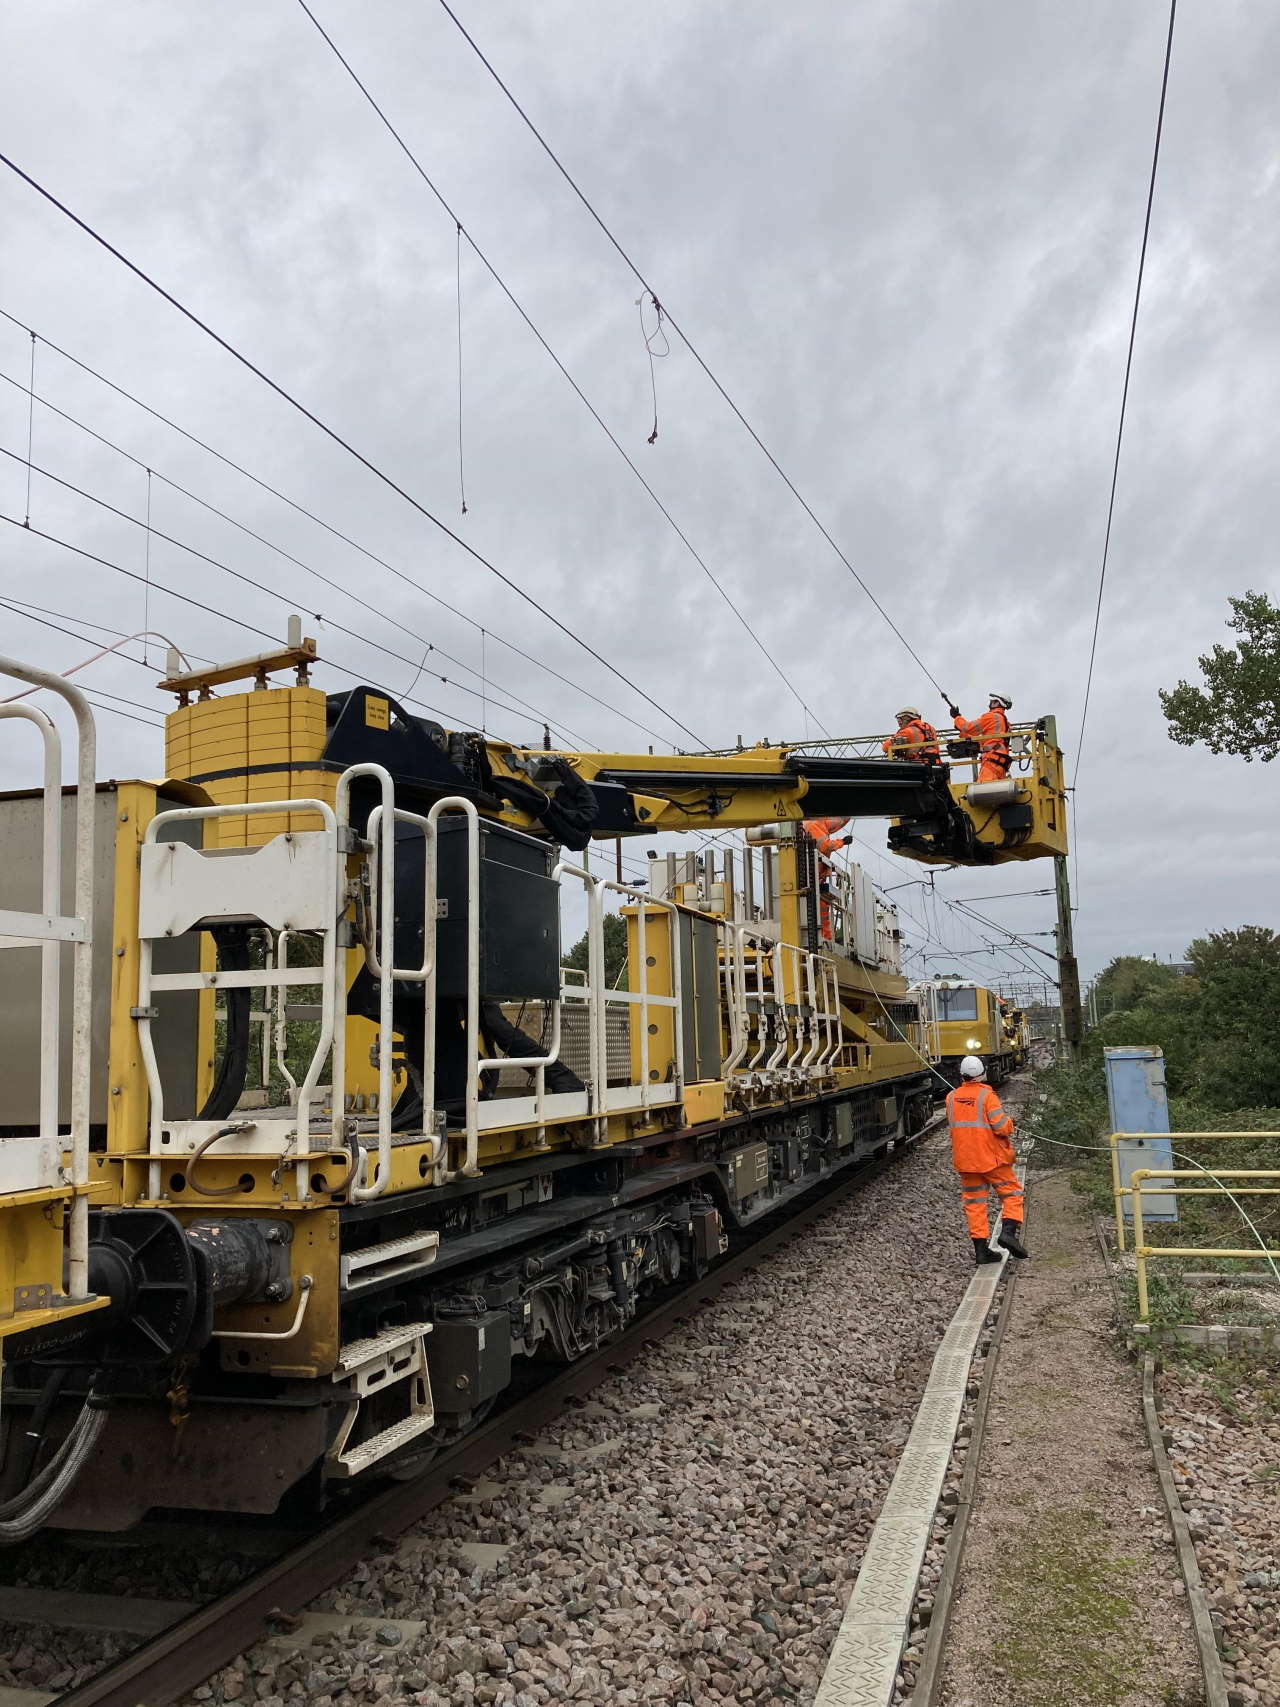 Essential track maintenance completed on Greater Anglia’s main line